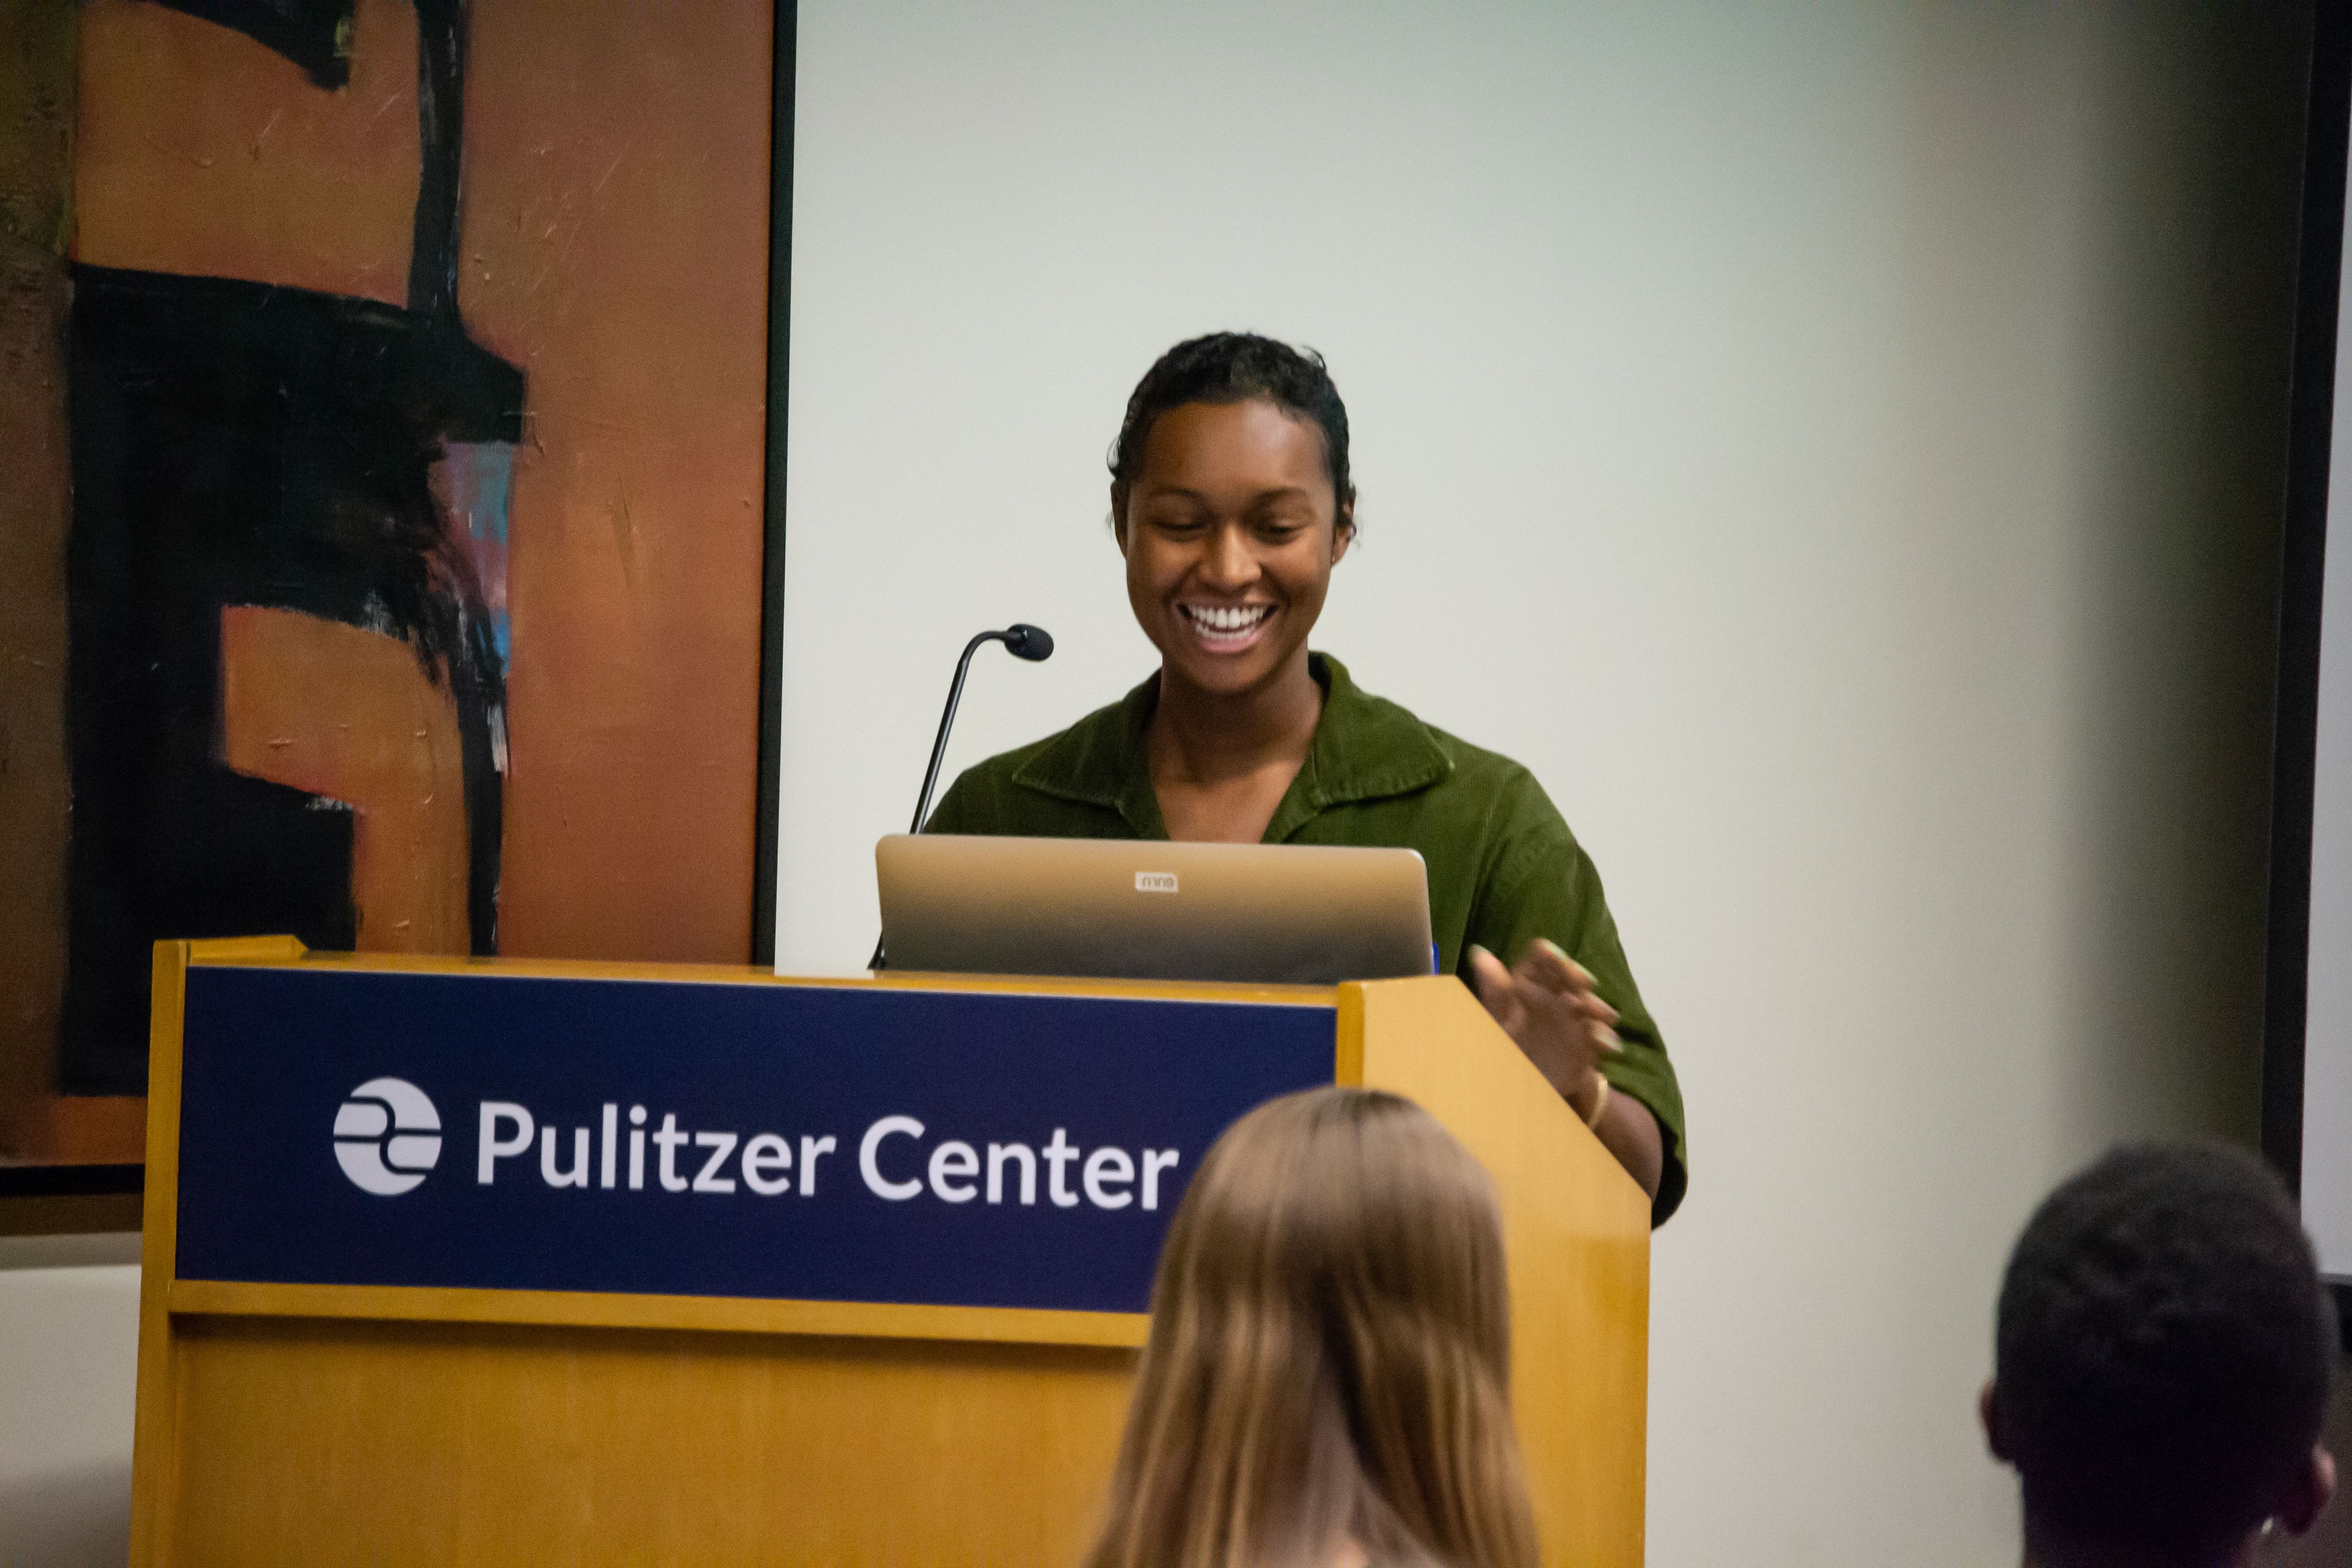 Autumn Harris (Spelman College) speaks on her project, "Ecuador: For Some, Dribbling Is the Only Way to Score" during the "Cultural Identity" panel on Day One of Washington Weekend. Image by Nora Moraga-Lewy. United States, 2019.